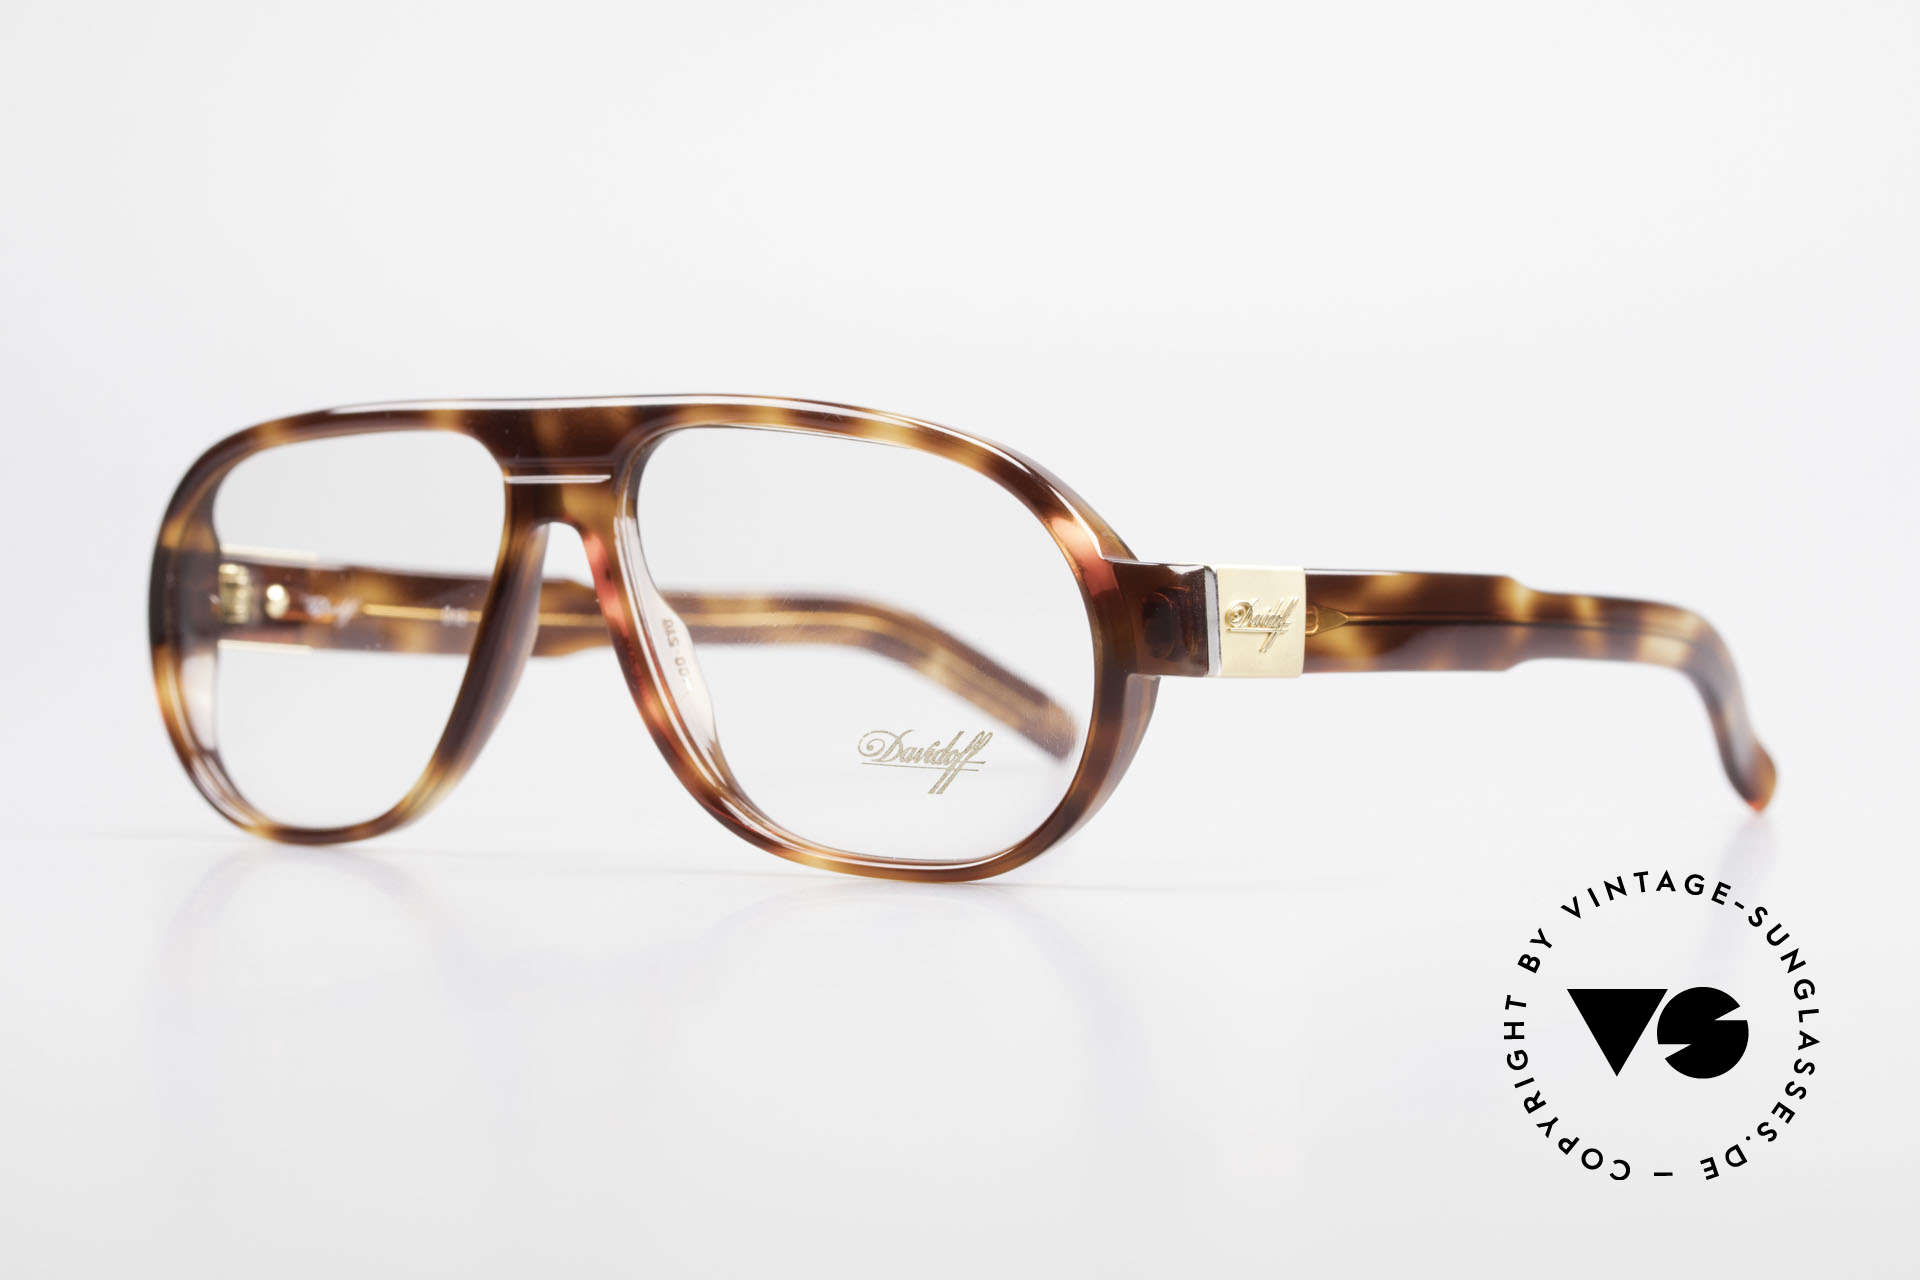 Davidoff 100 90's Men's Vintage Frame, with gold-plated hinges and appliqué on the temples, Made for Men